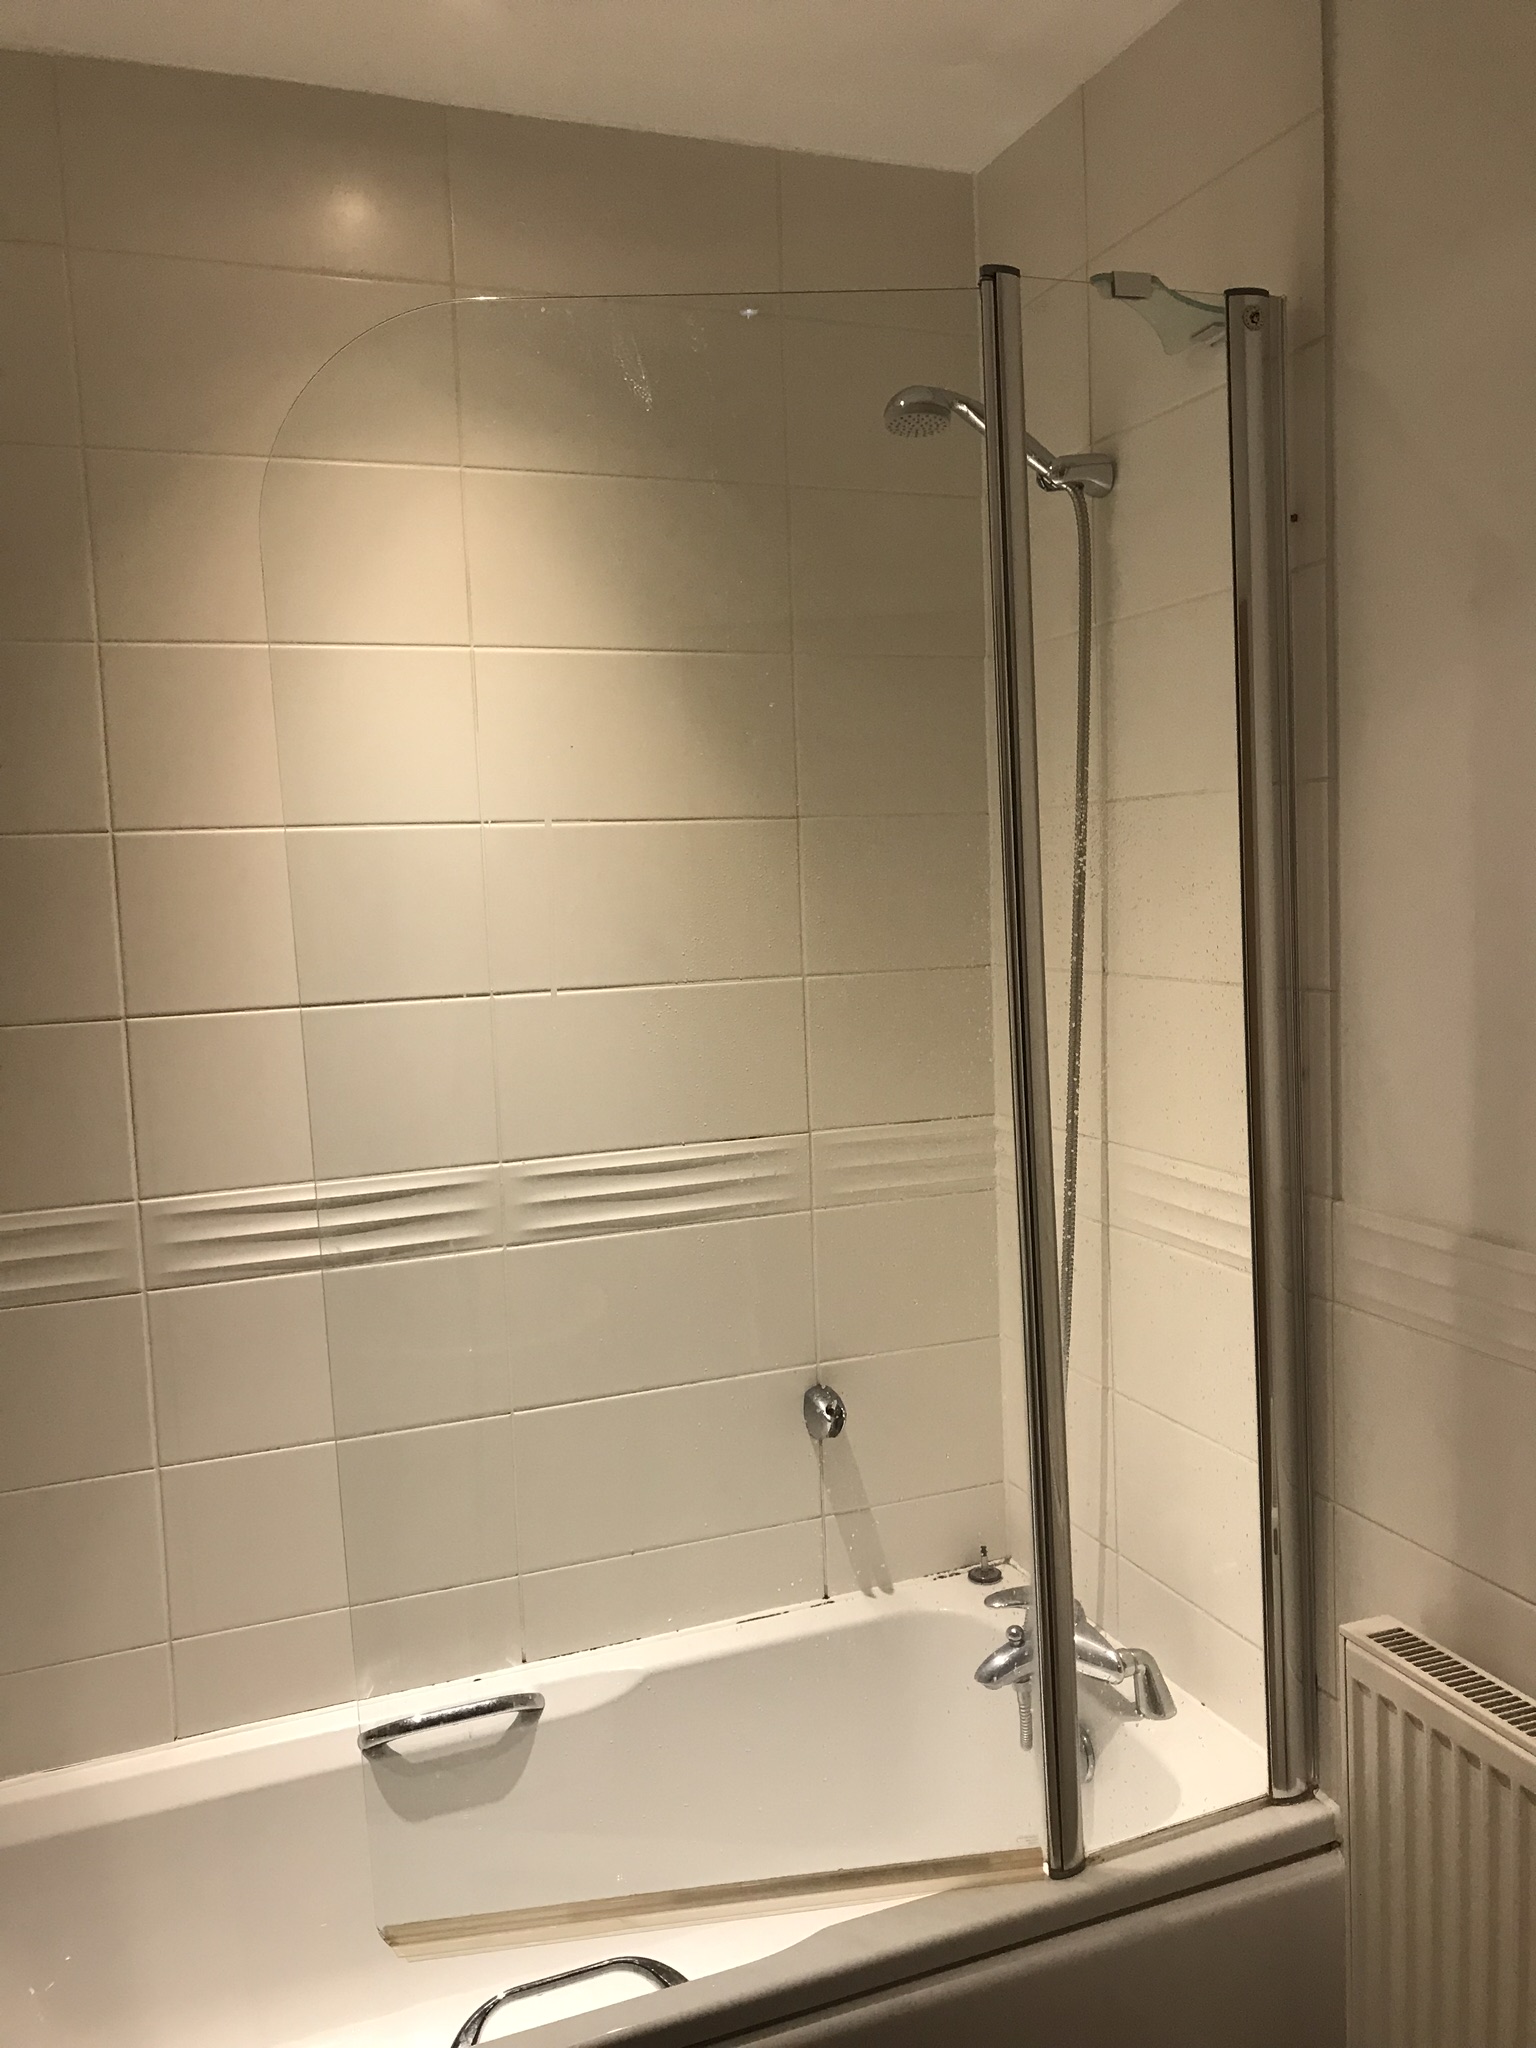 Old bath in the bathroom with shower hose and plain white tiled wall